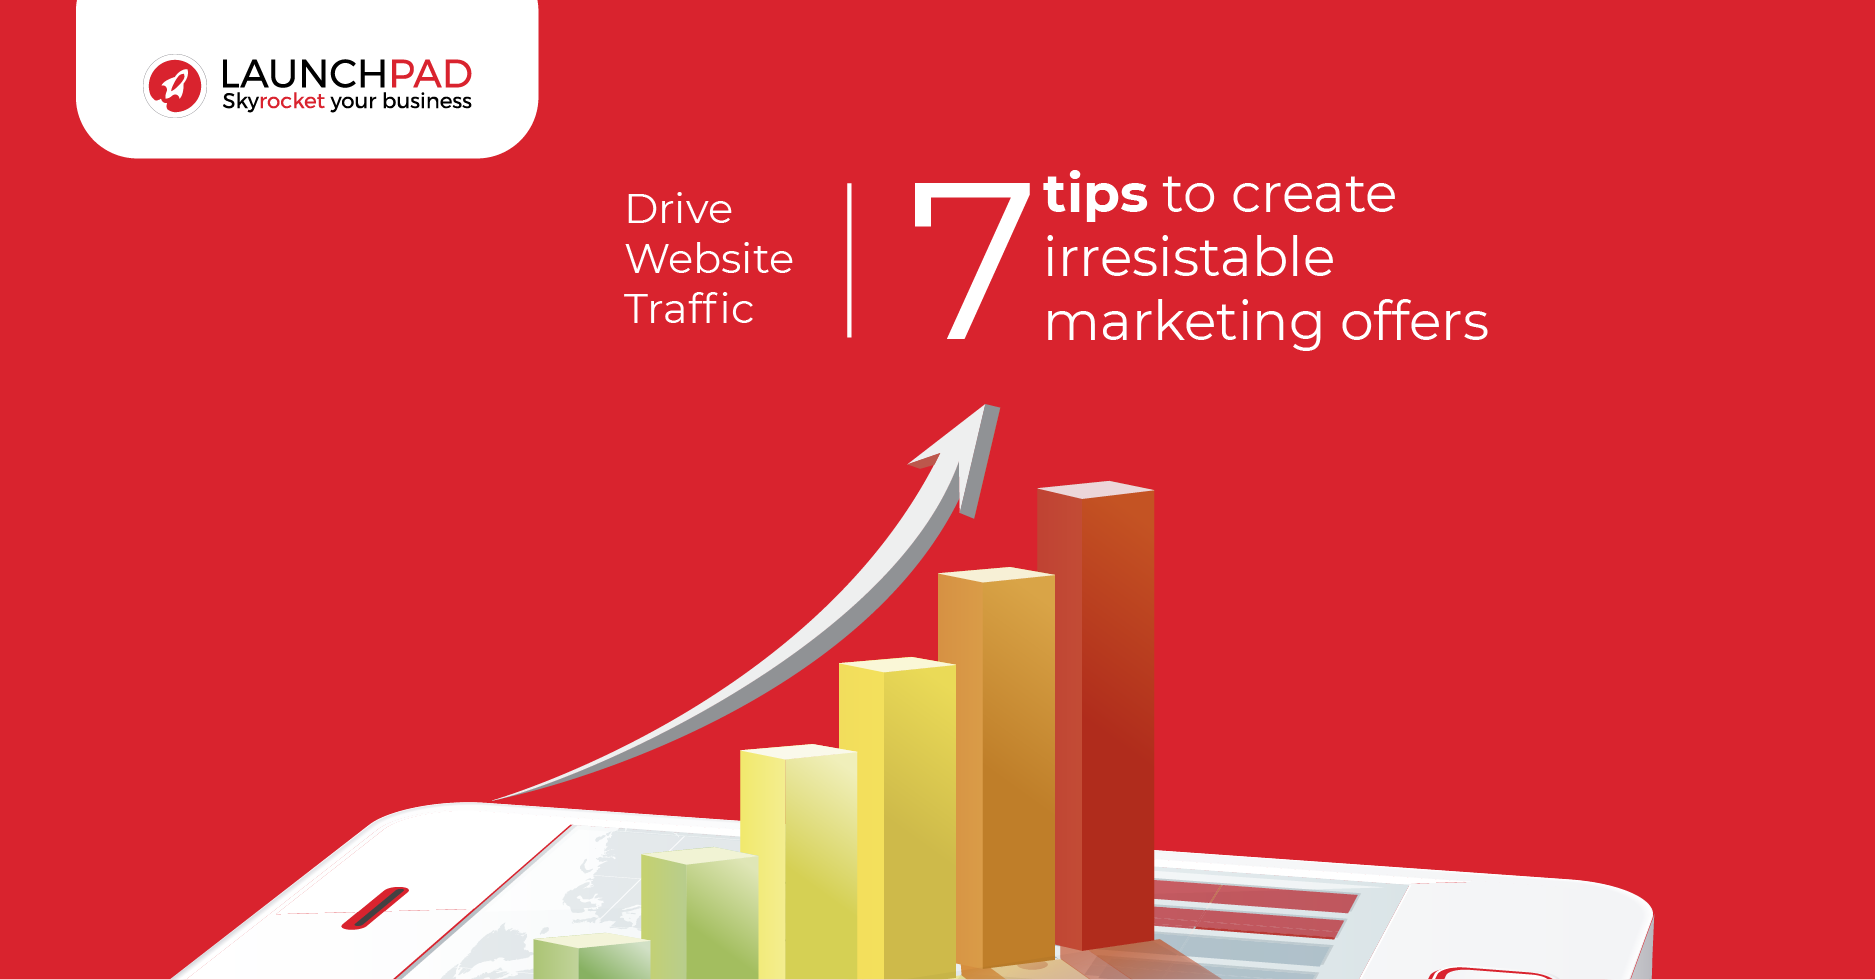 7 tips to create irresistible marketing offers